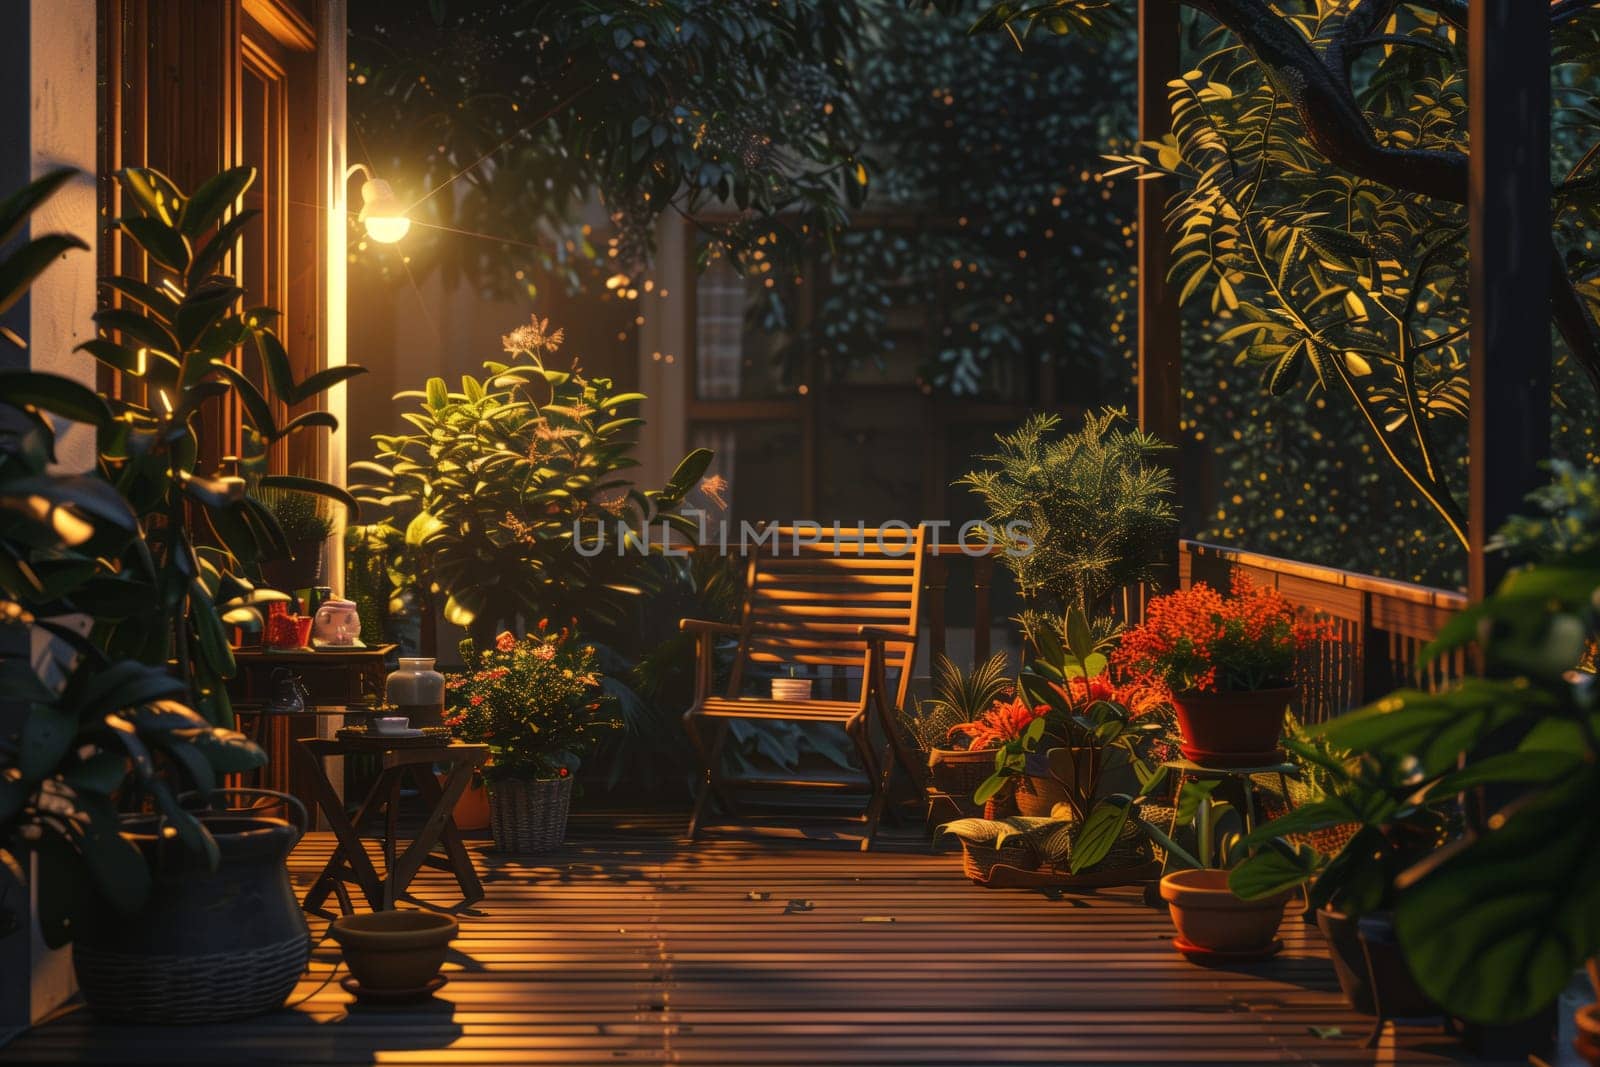 A wooden porch with a chair, table, and potted plants illuminated by the darkness of night, creating a serene landscape outside a building